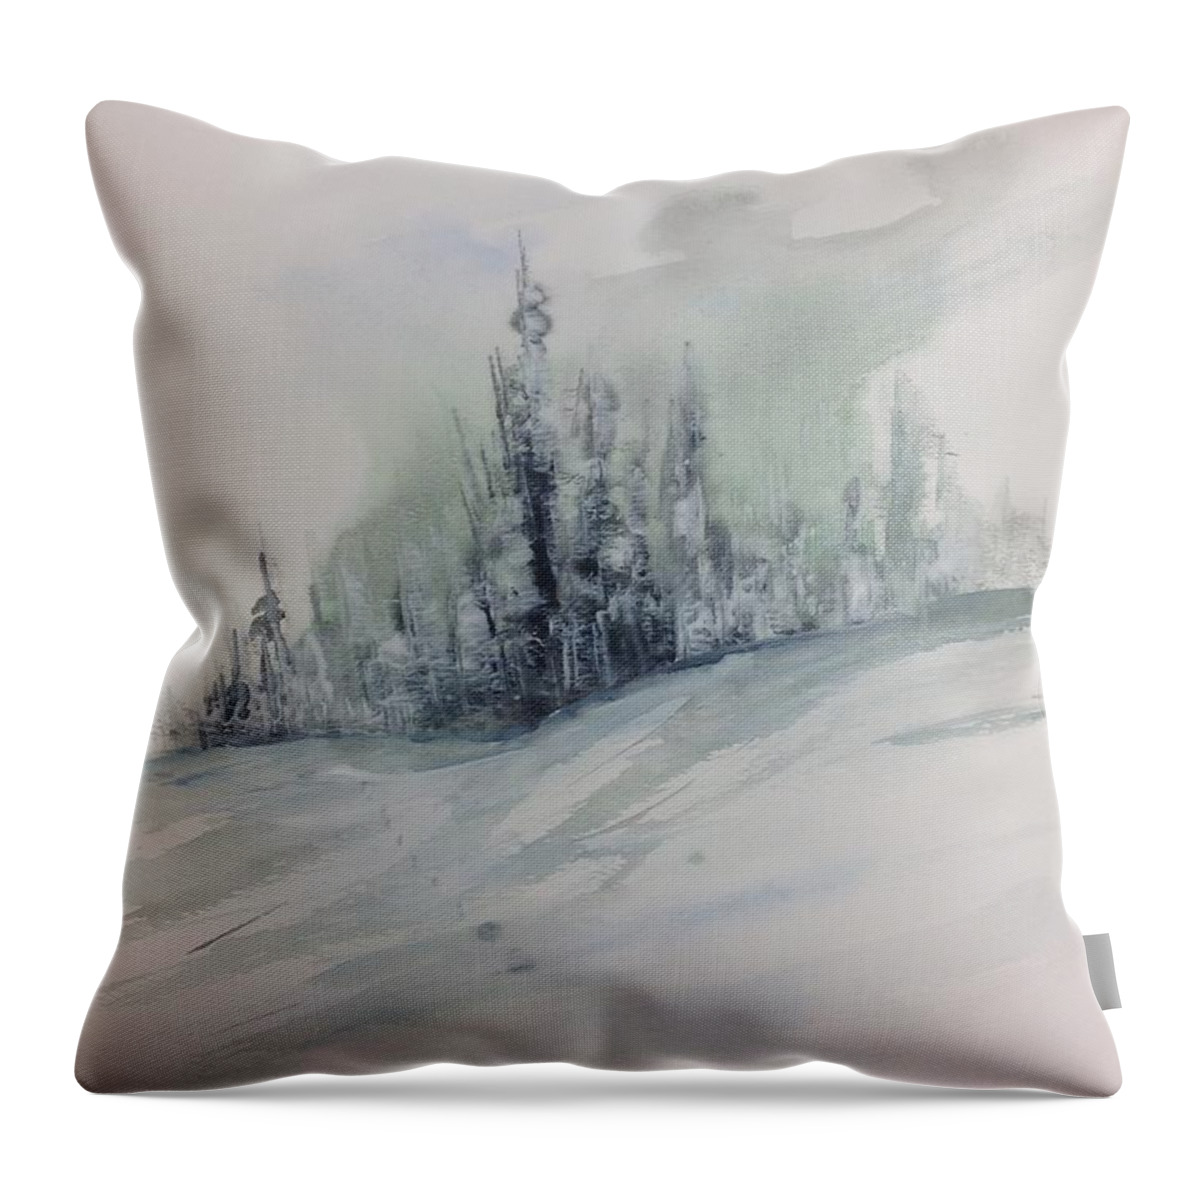 Abstract Watercolour Landscape Painting Throw Pillow featuring the painting Frost on the Pines by Desmond Raymond